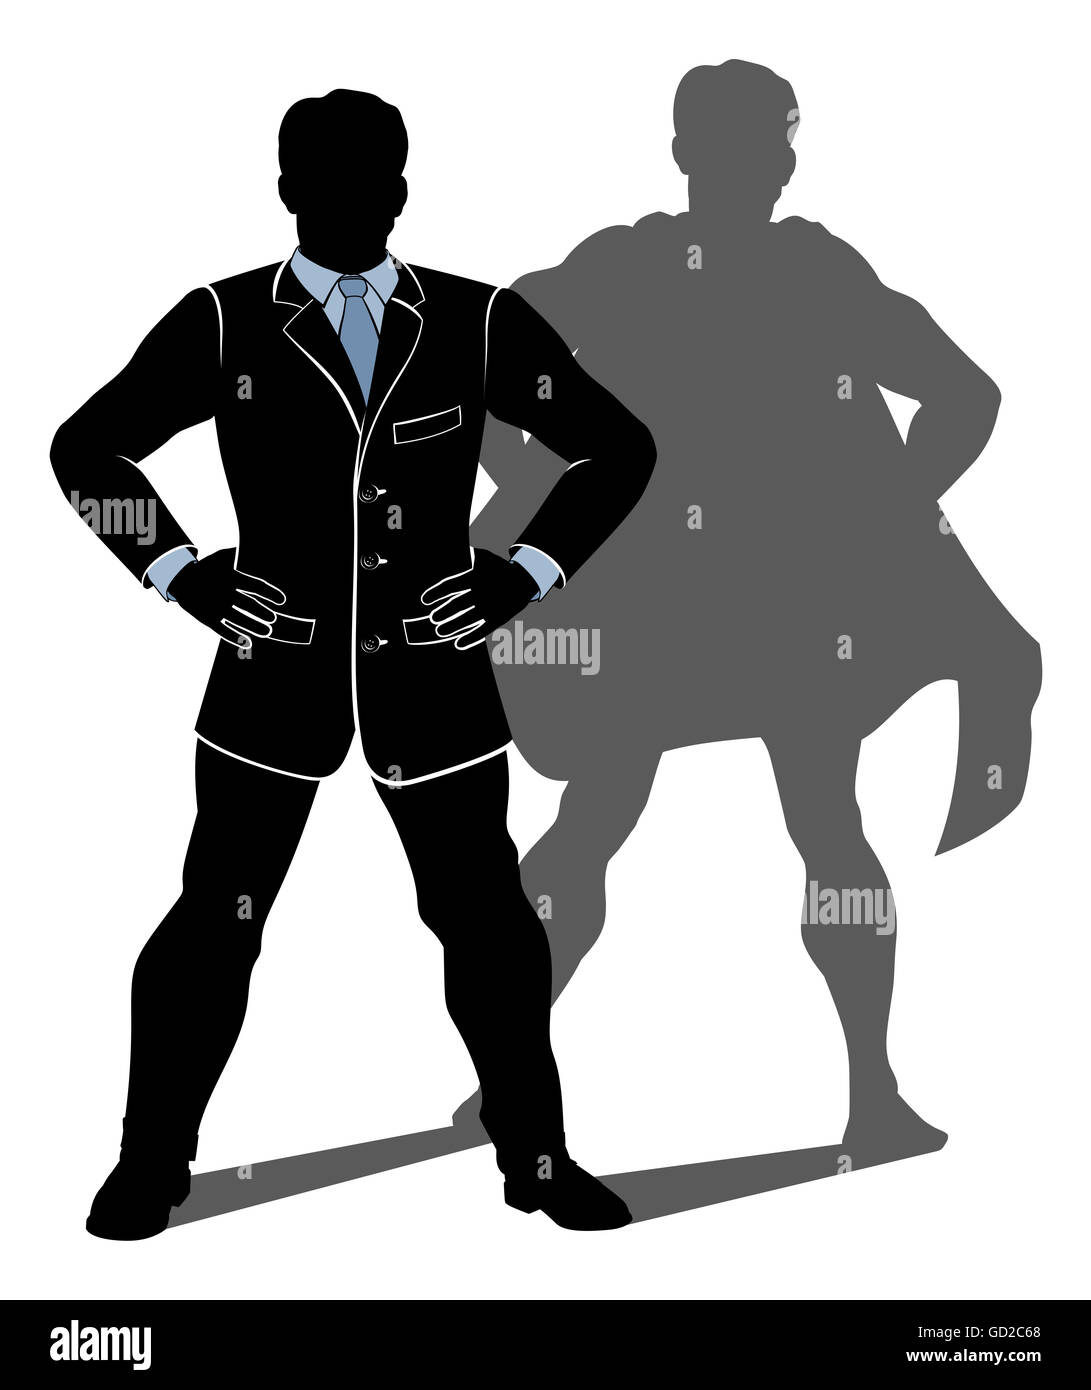 An illustration of a superhero businessman standing with hands on hips with shadow in shape of a caped super hero. Stock Photo